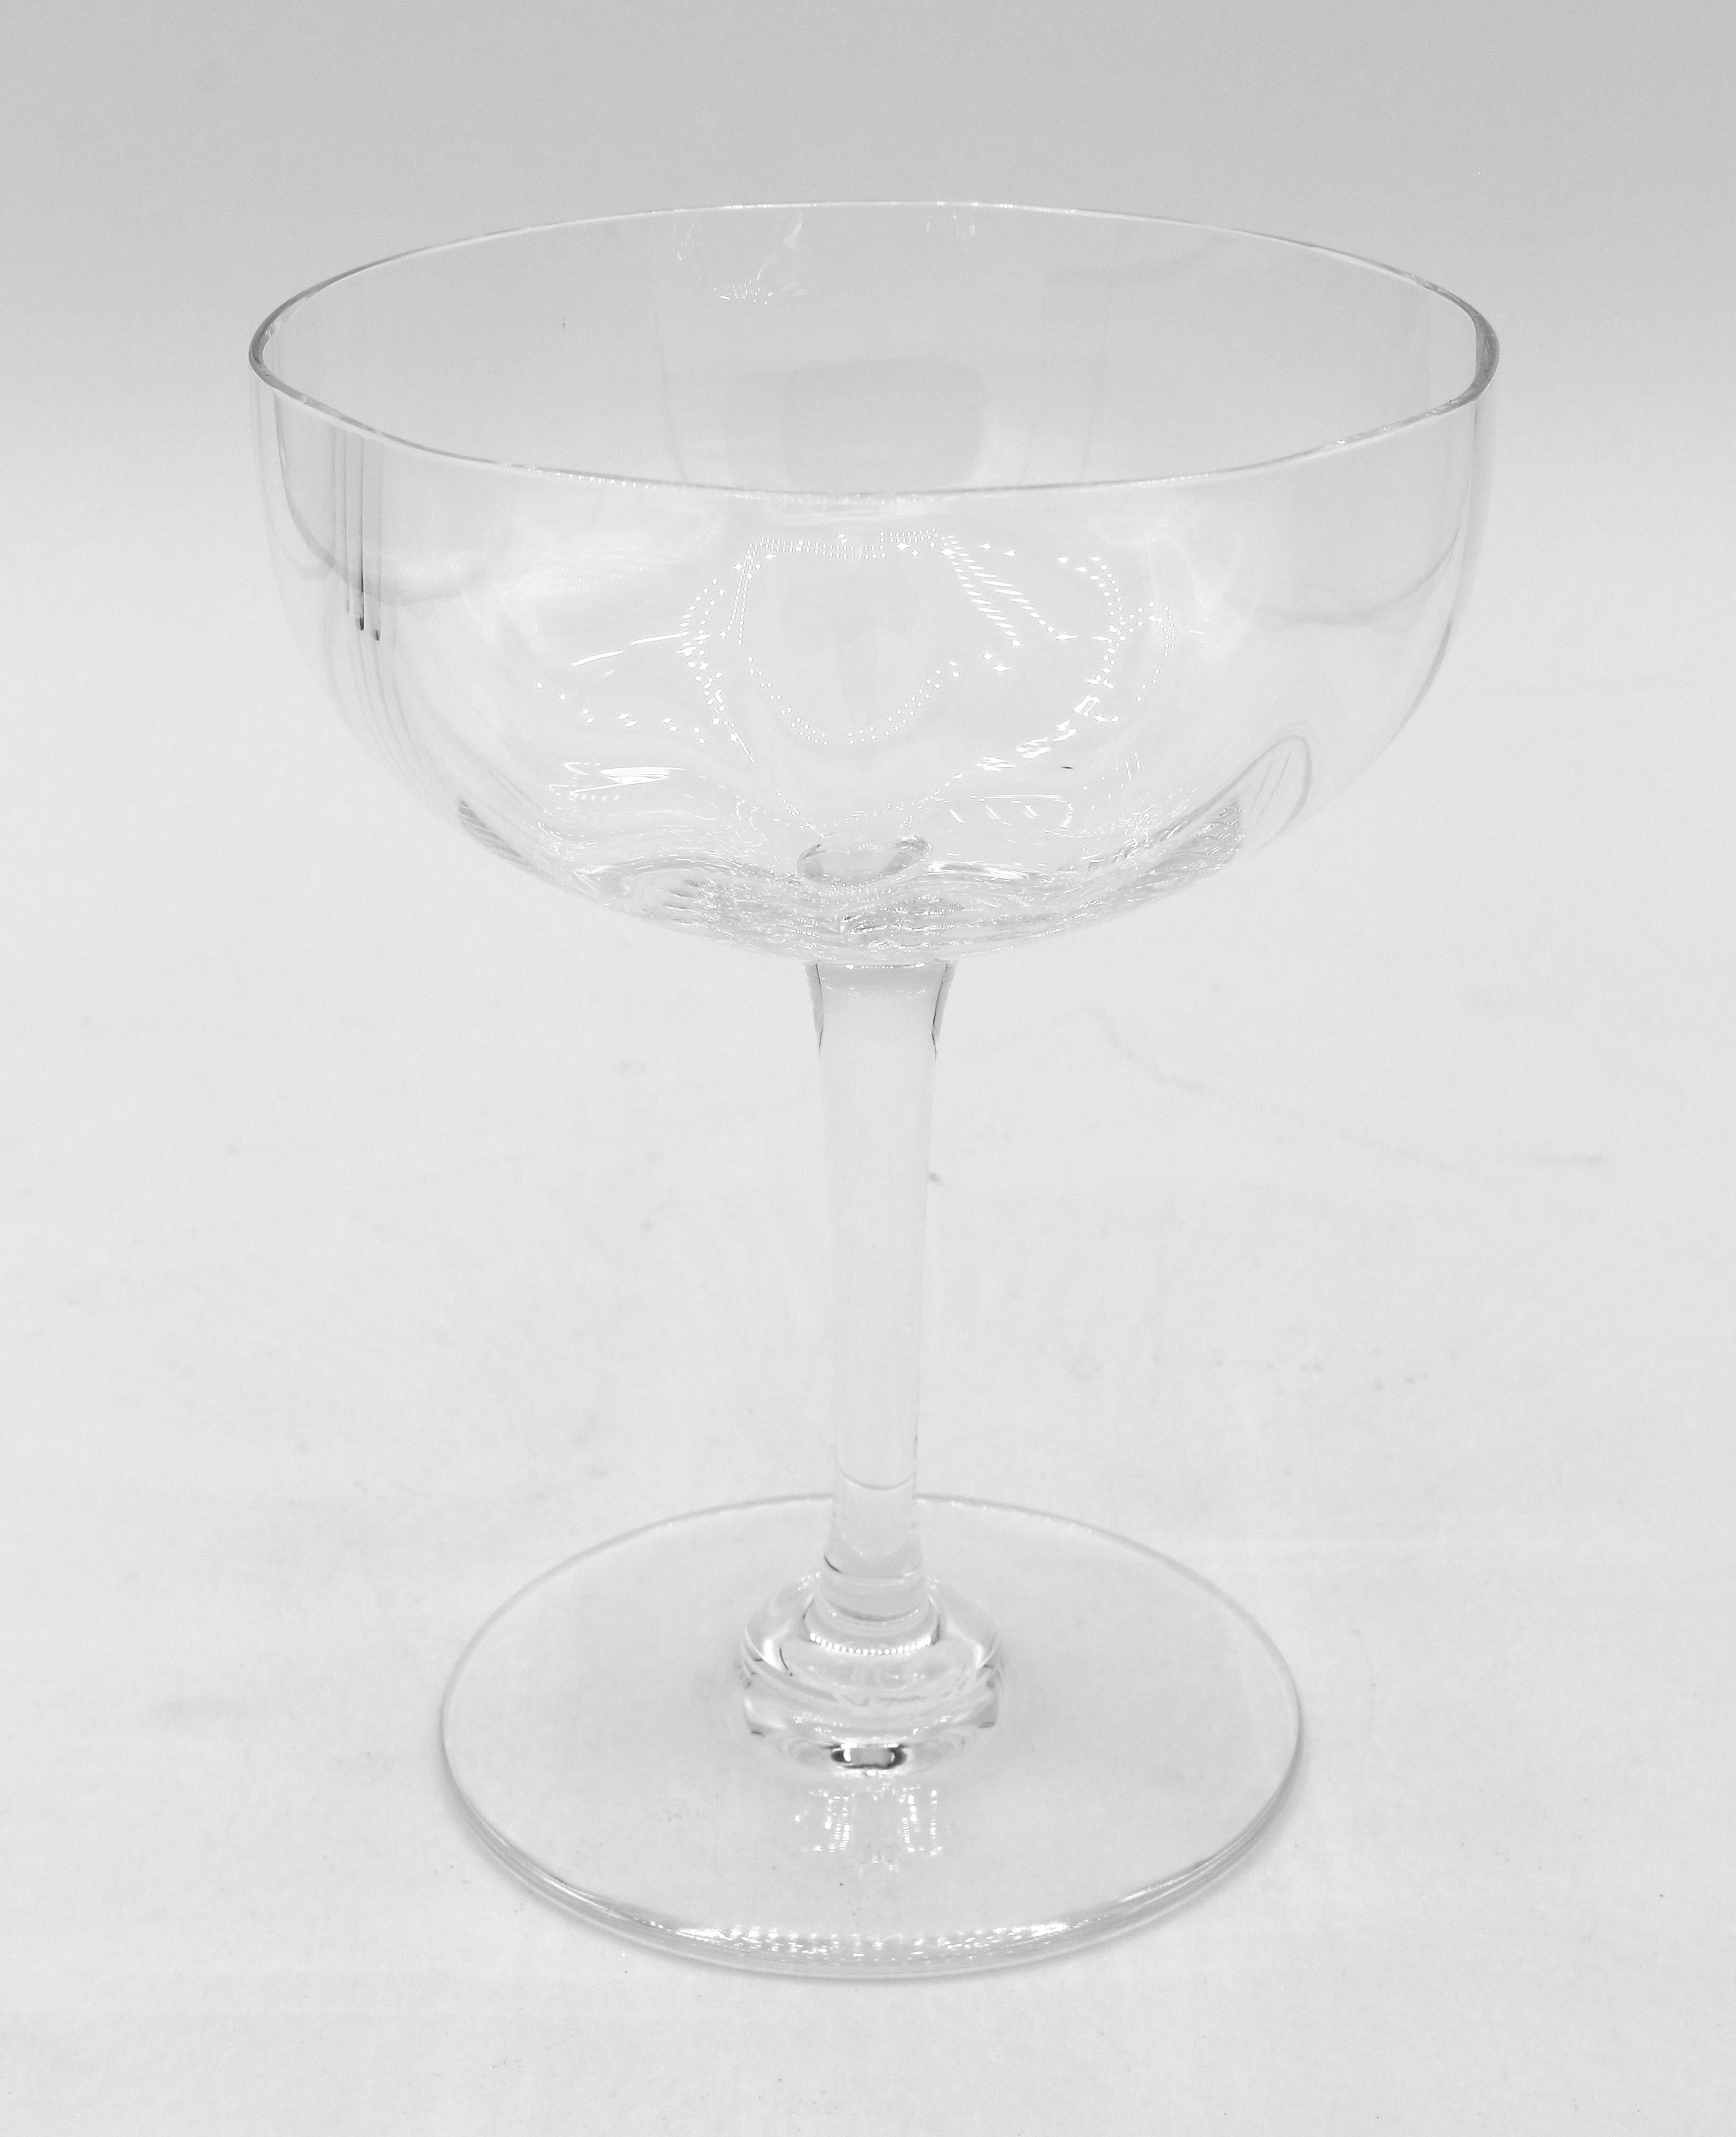 Set of 10 Baccarat Montaigne Optic tall champagne coupes or sherbets. Each signed. Classically traditional yet modern design, mouth blown with molded inner ridges creating the shimmering effect. Introduced in the late 19th century, they are now